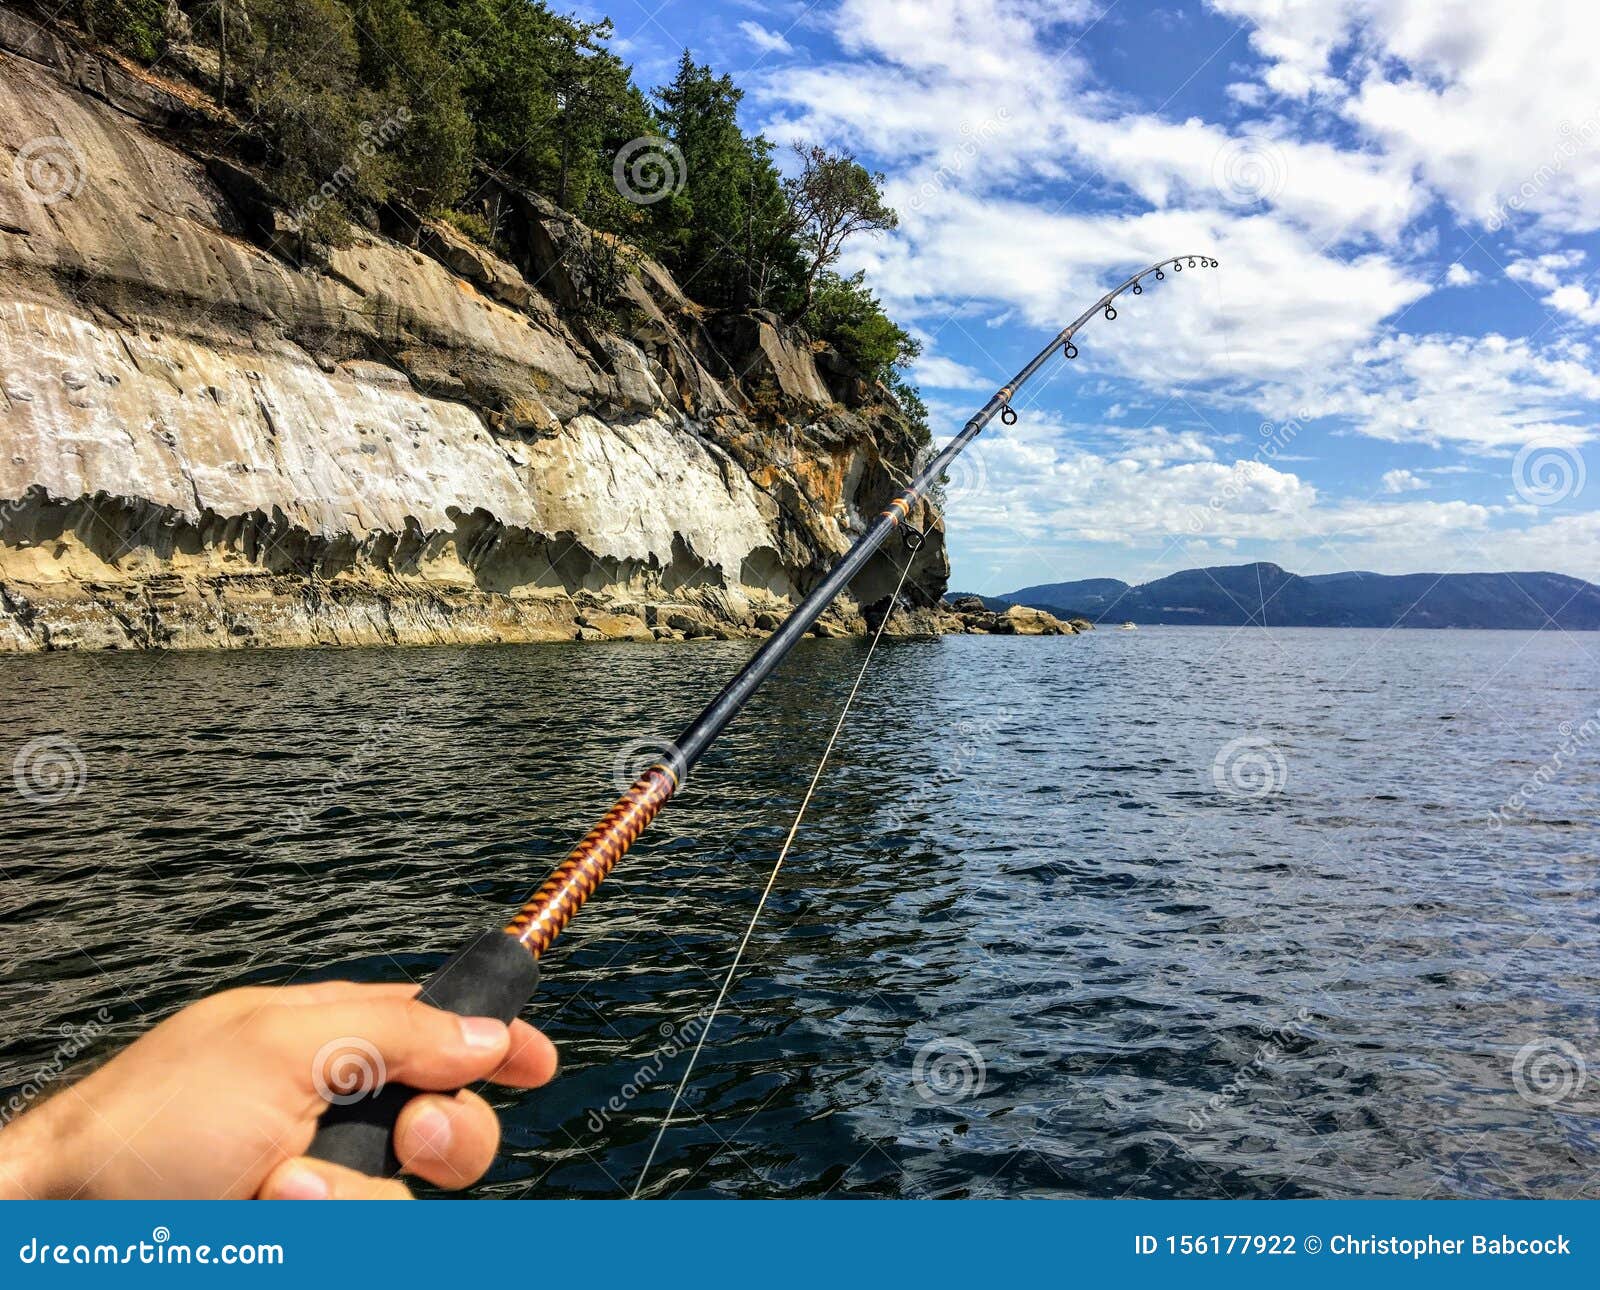 A Male Hand Holding a Fishing Rod Jigging for Fish with the